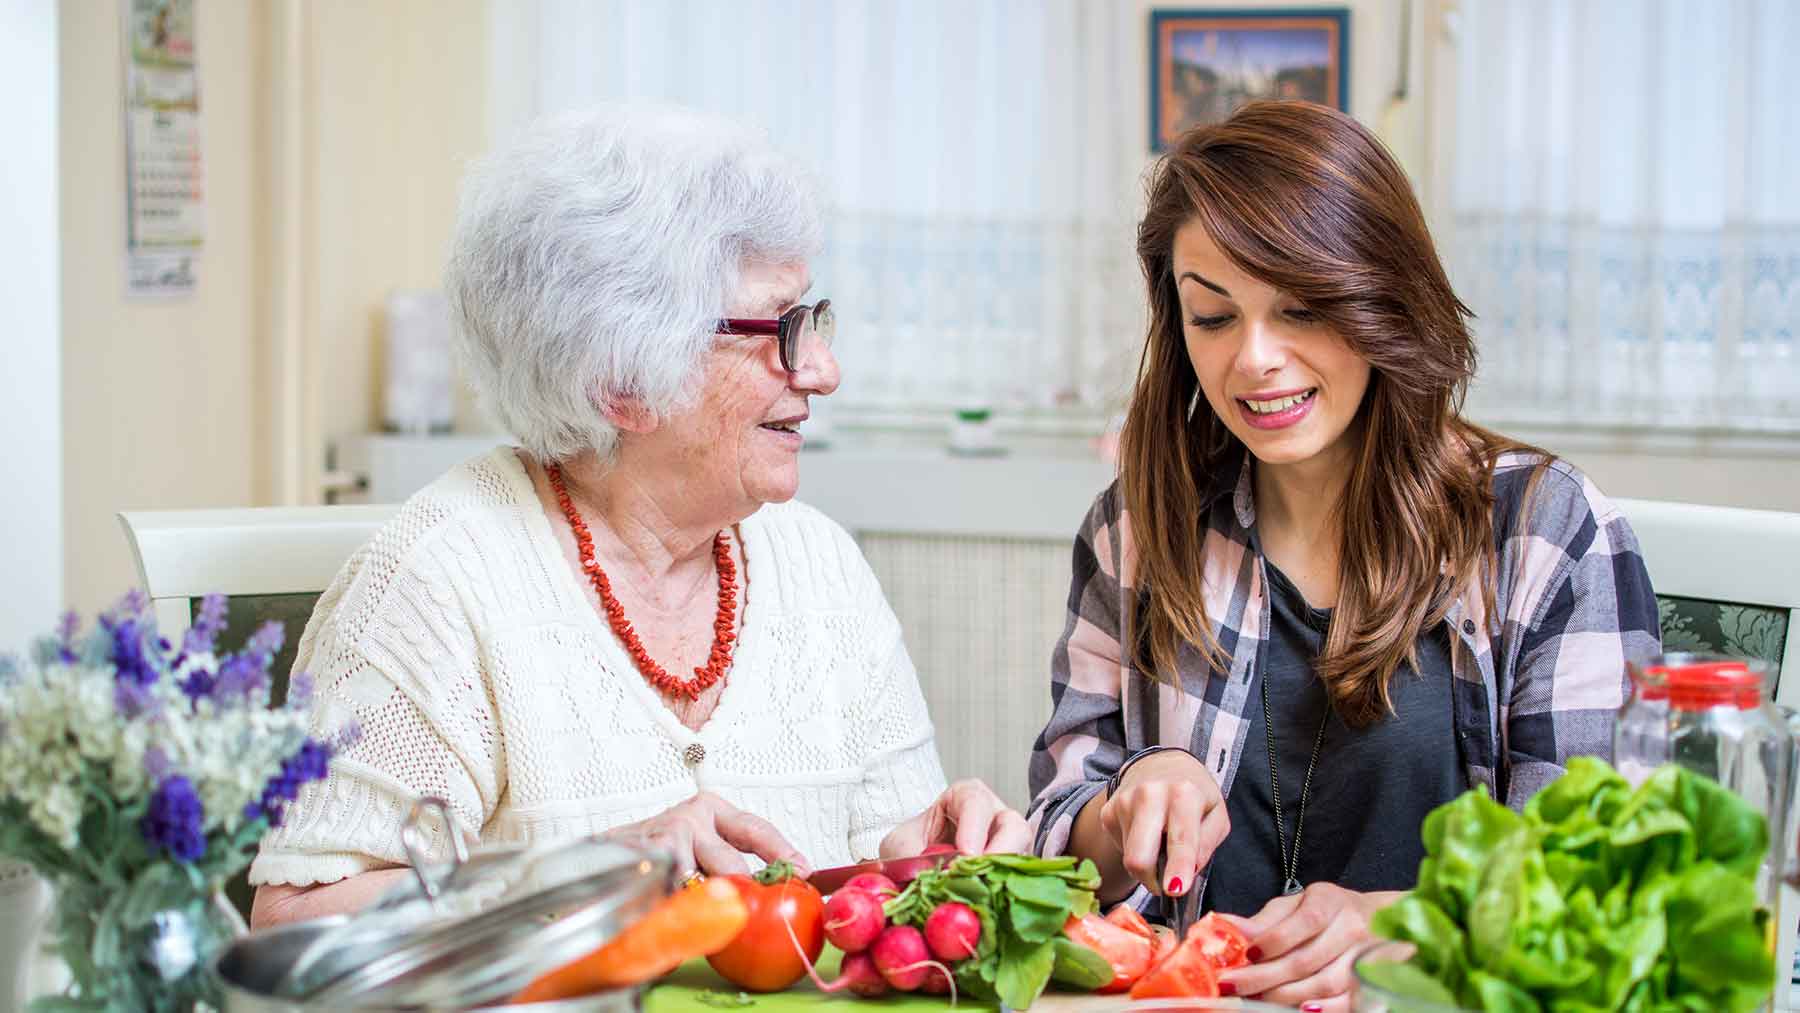 elderly woman and younger woman sitting at table chopping vegetables